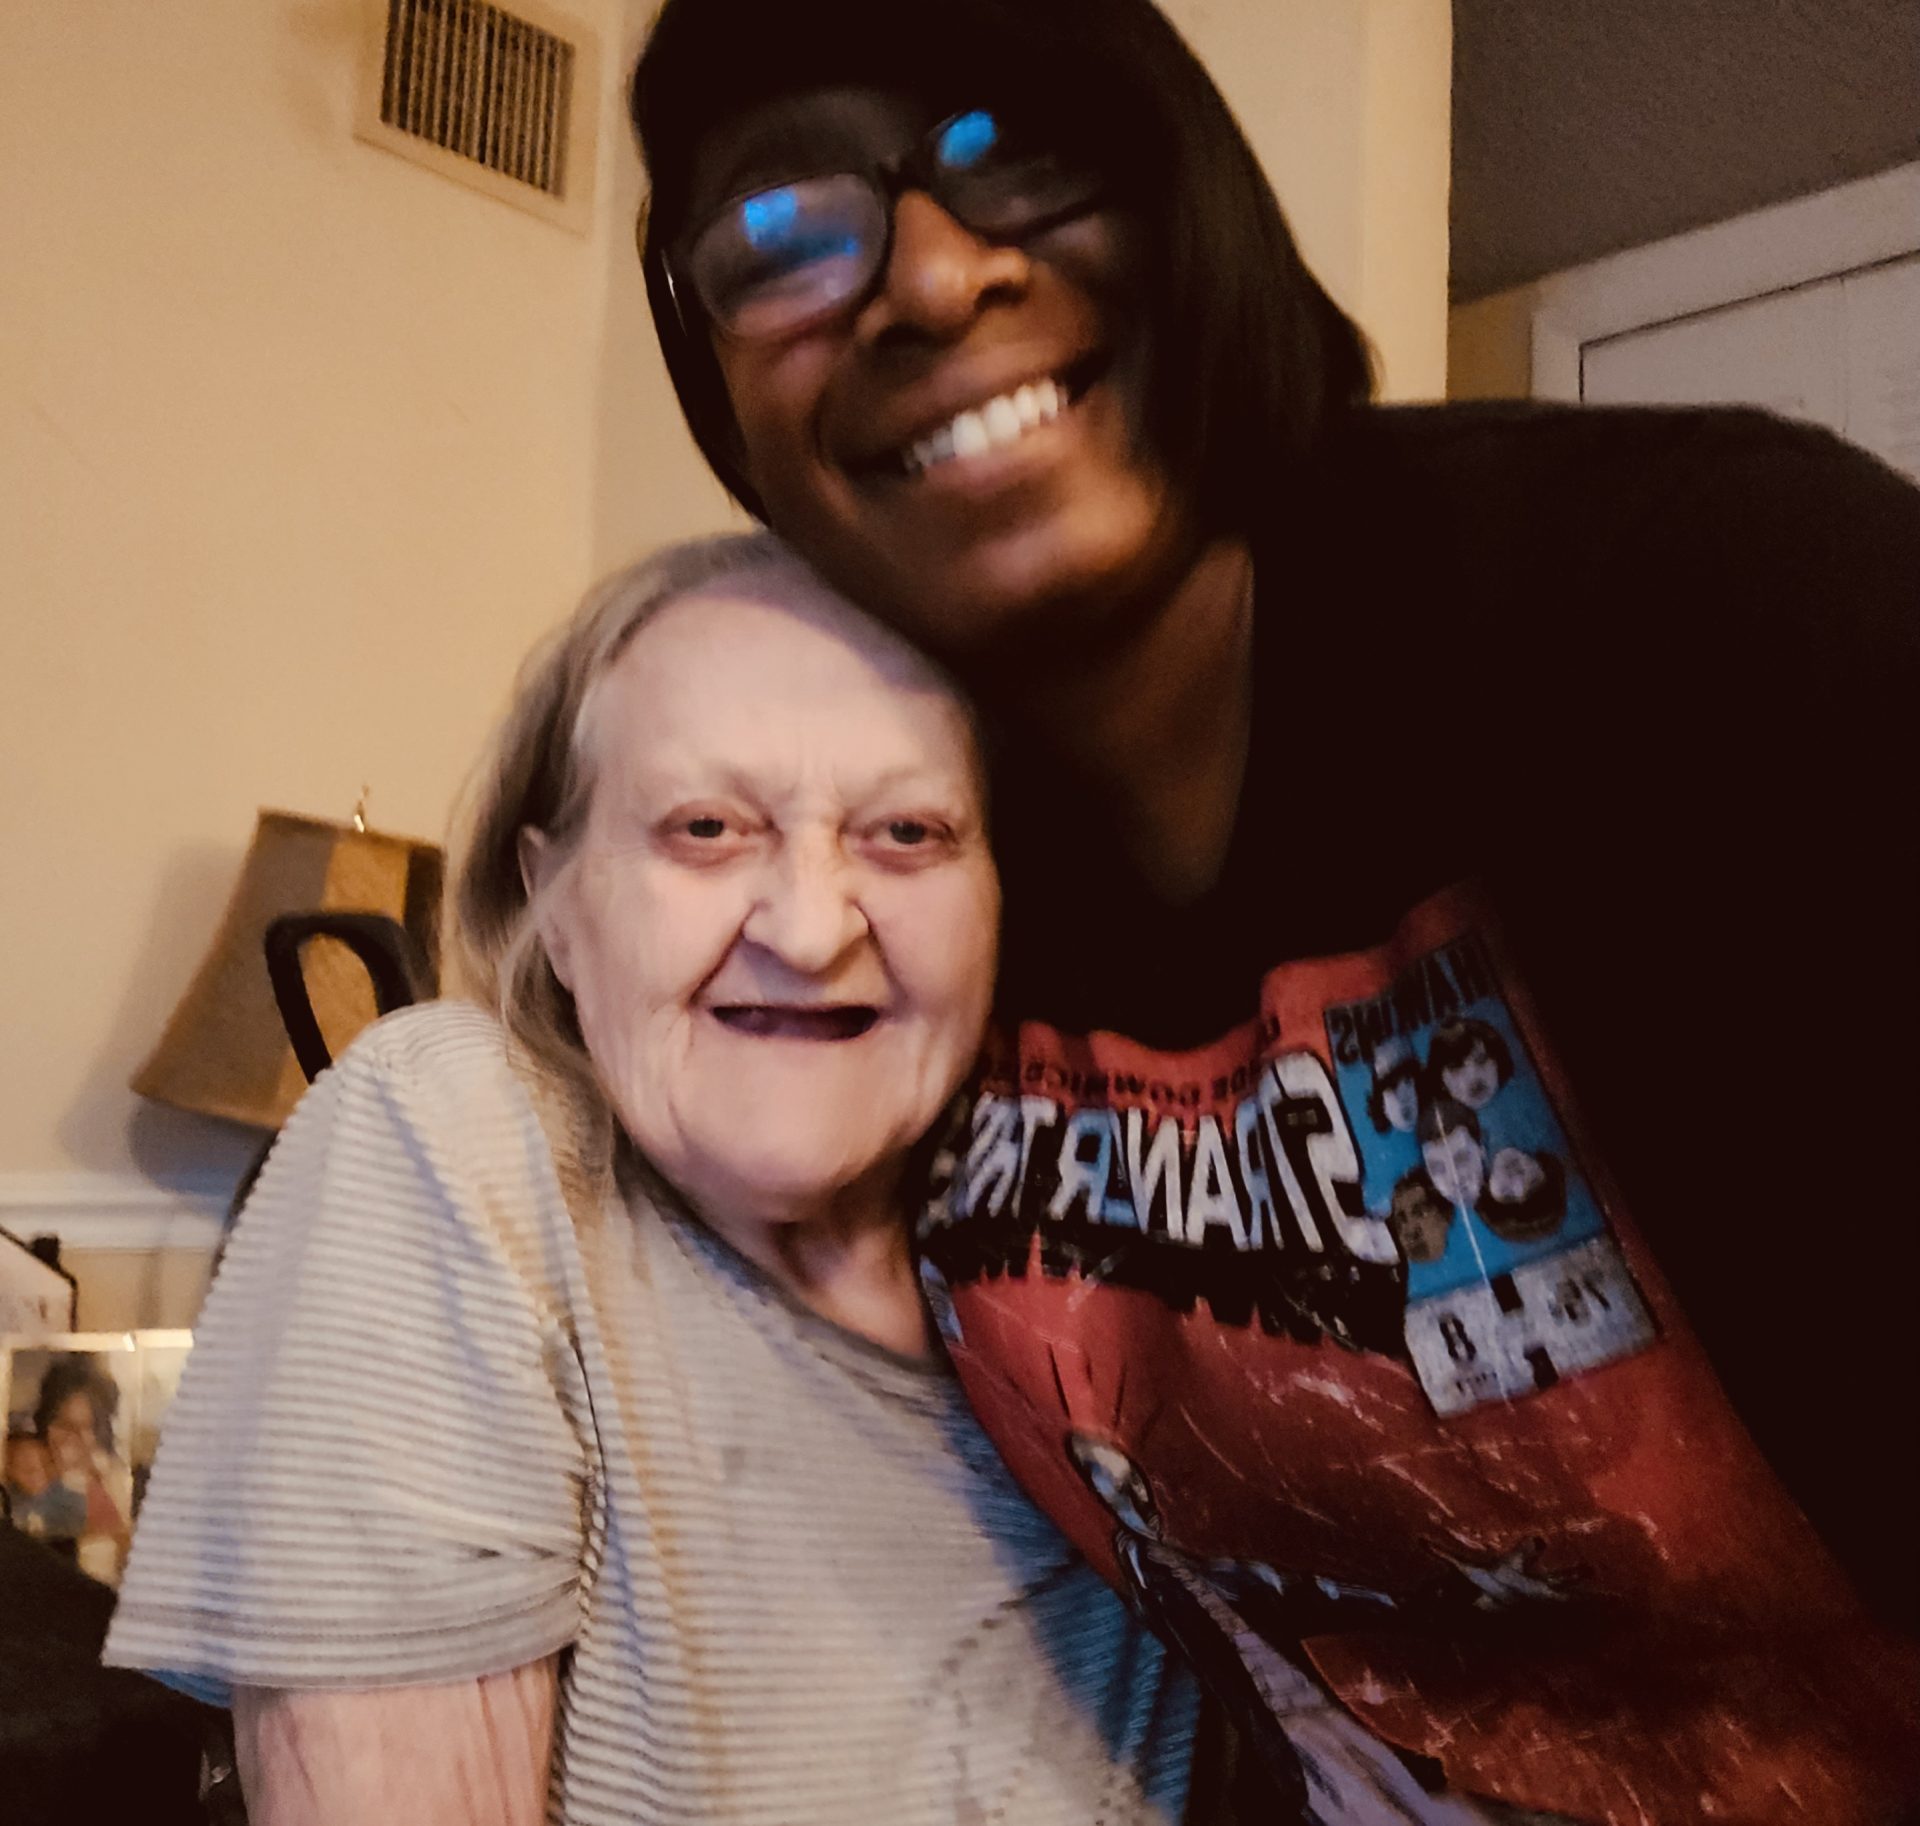 Our last photo together… nothing but smiles ❤️ Rest in Heaven Ma love you very much!